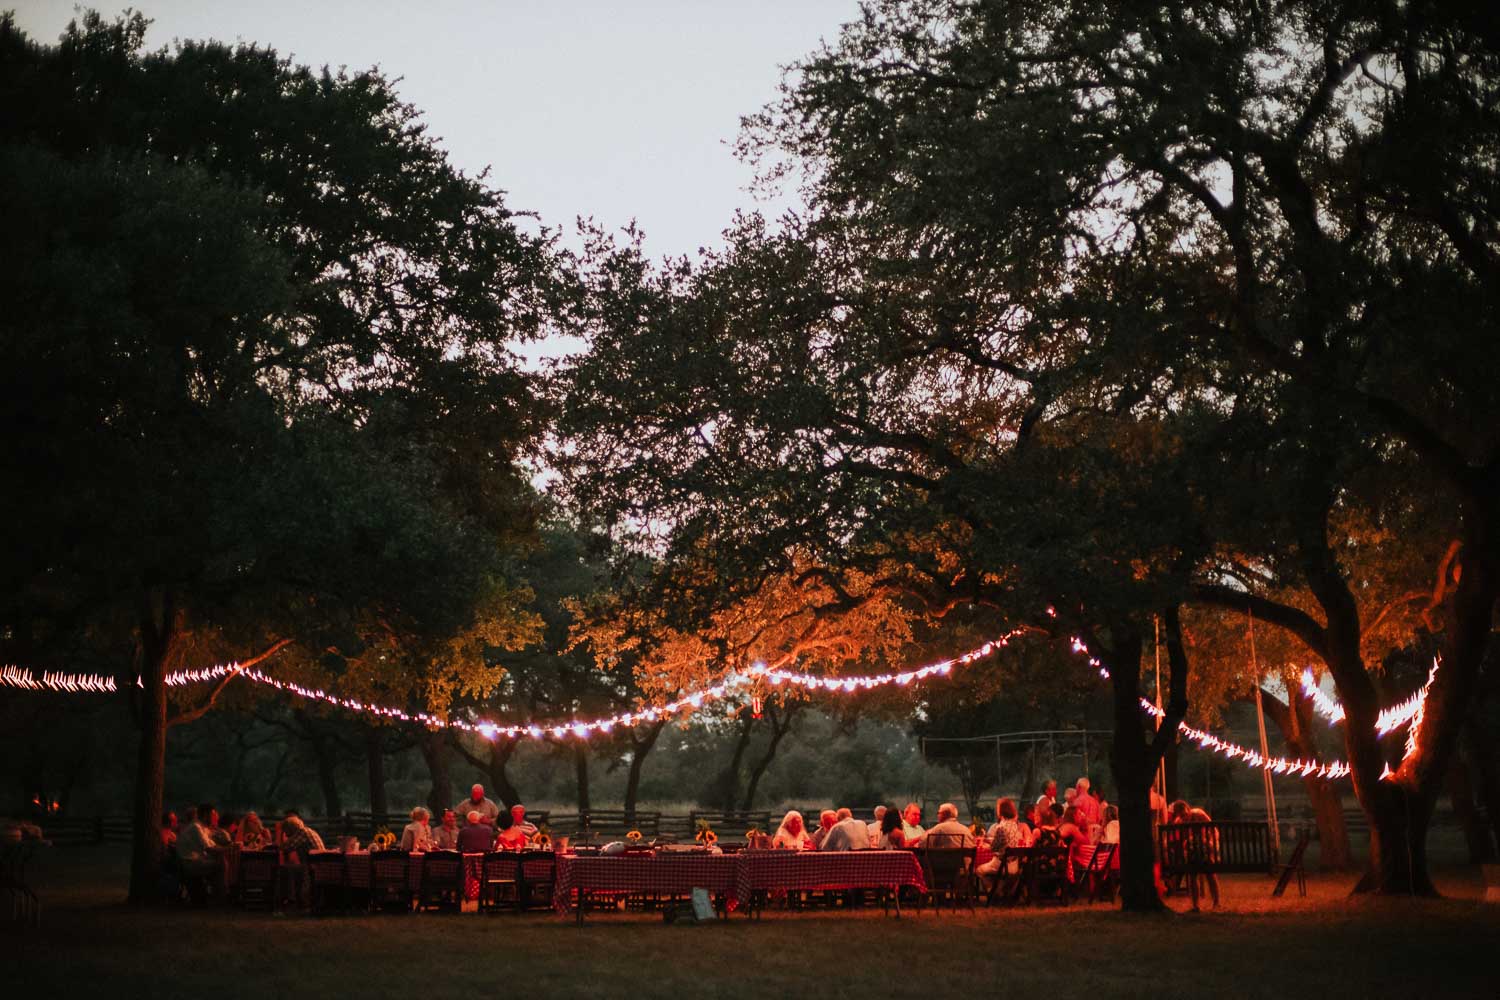 Twilight image of an outdoor rehearsal dinner party with twinkling lights and long outdoor tables